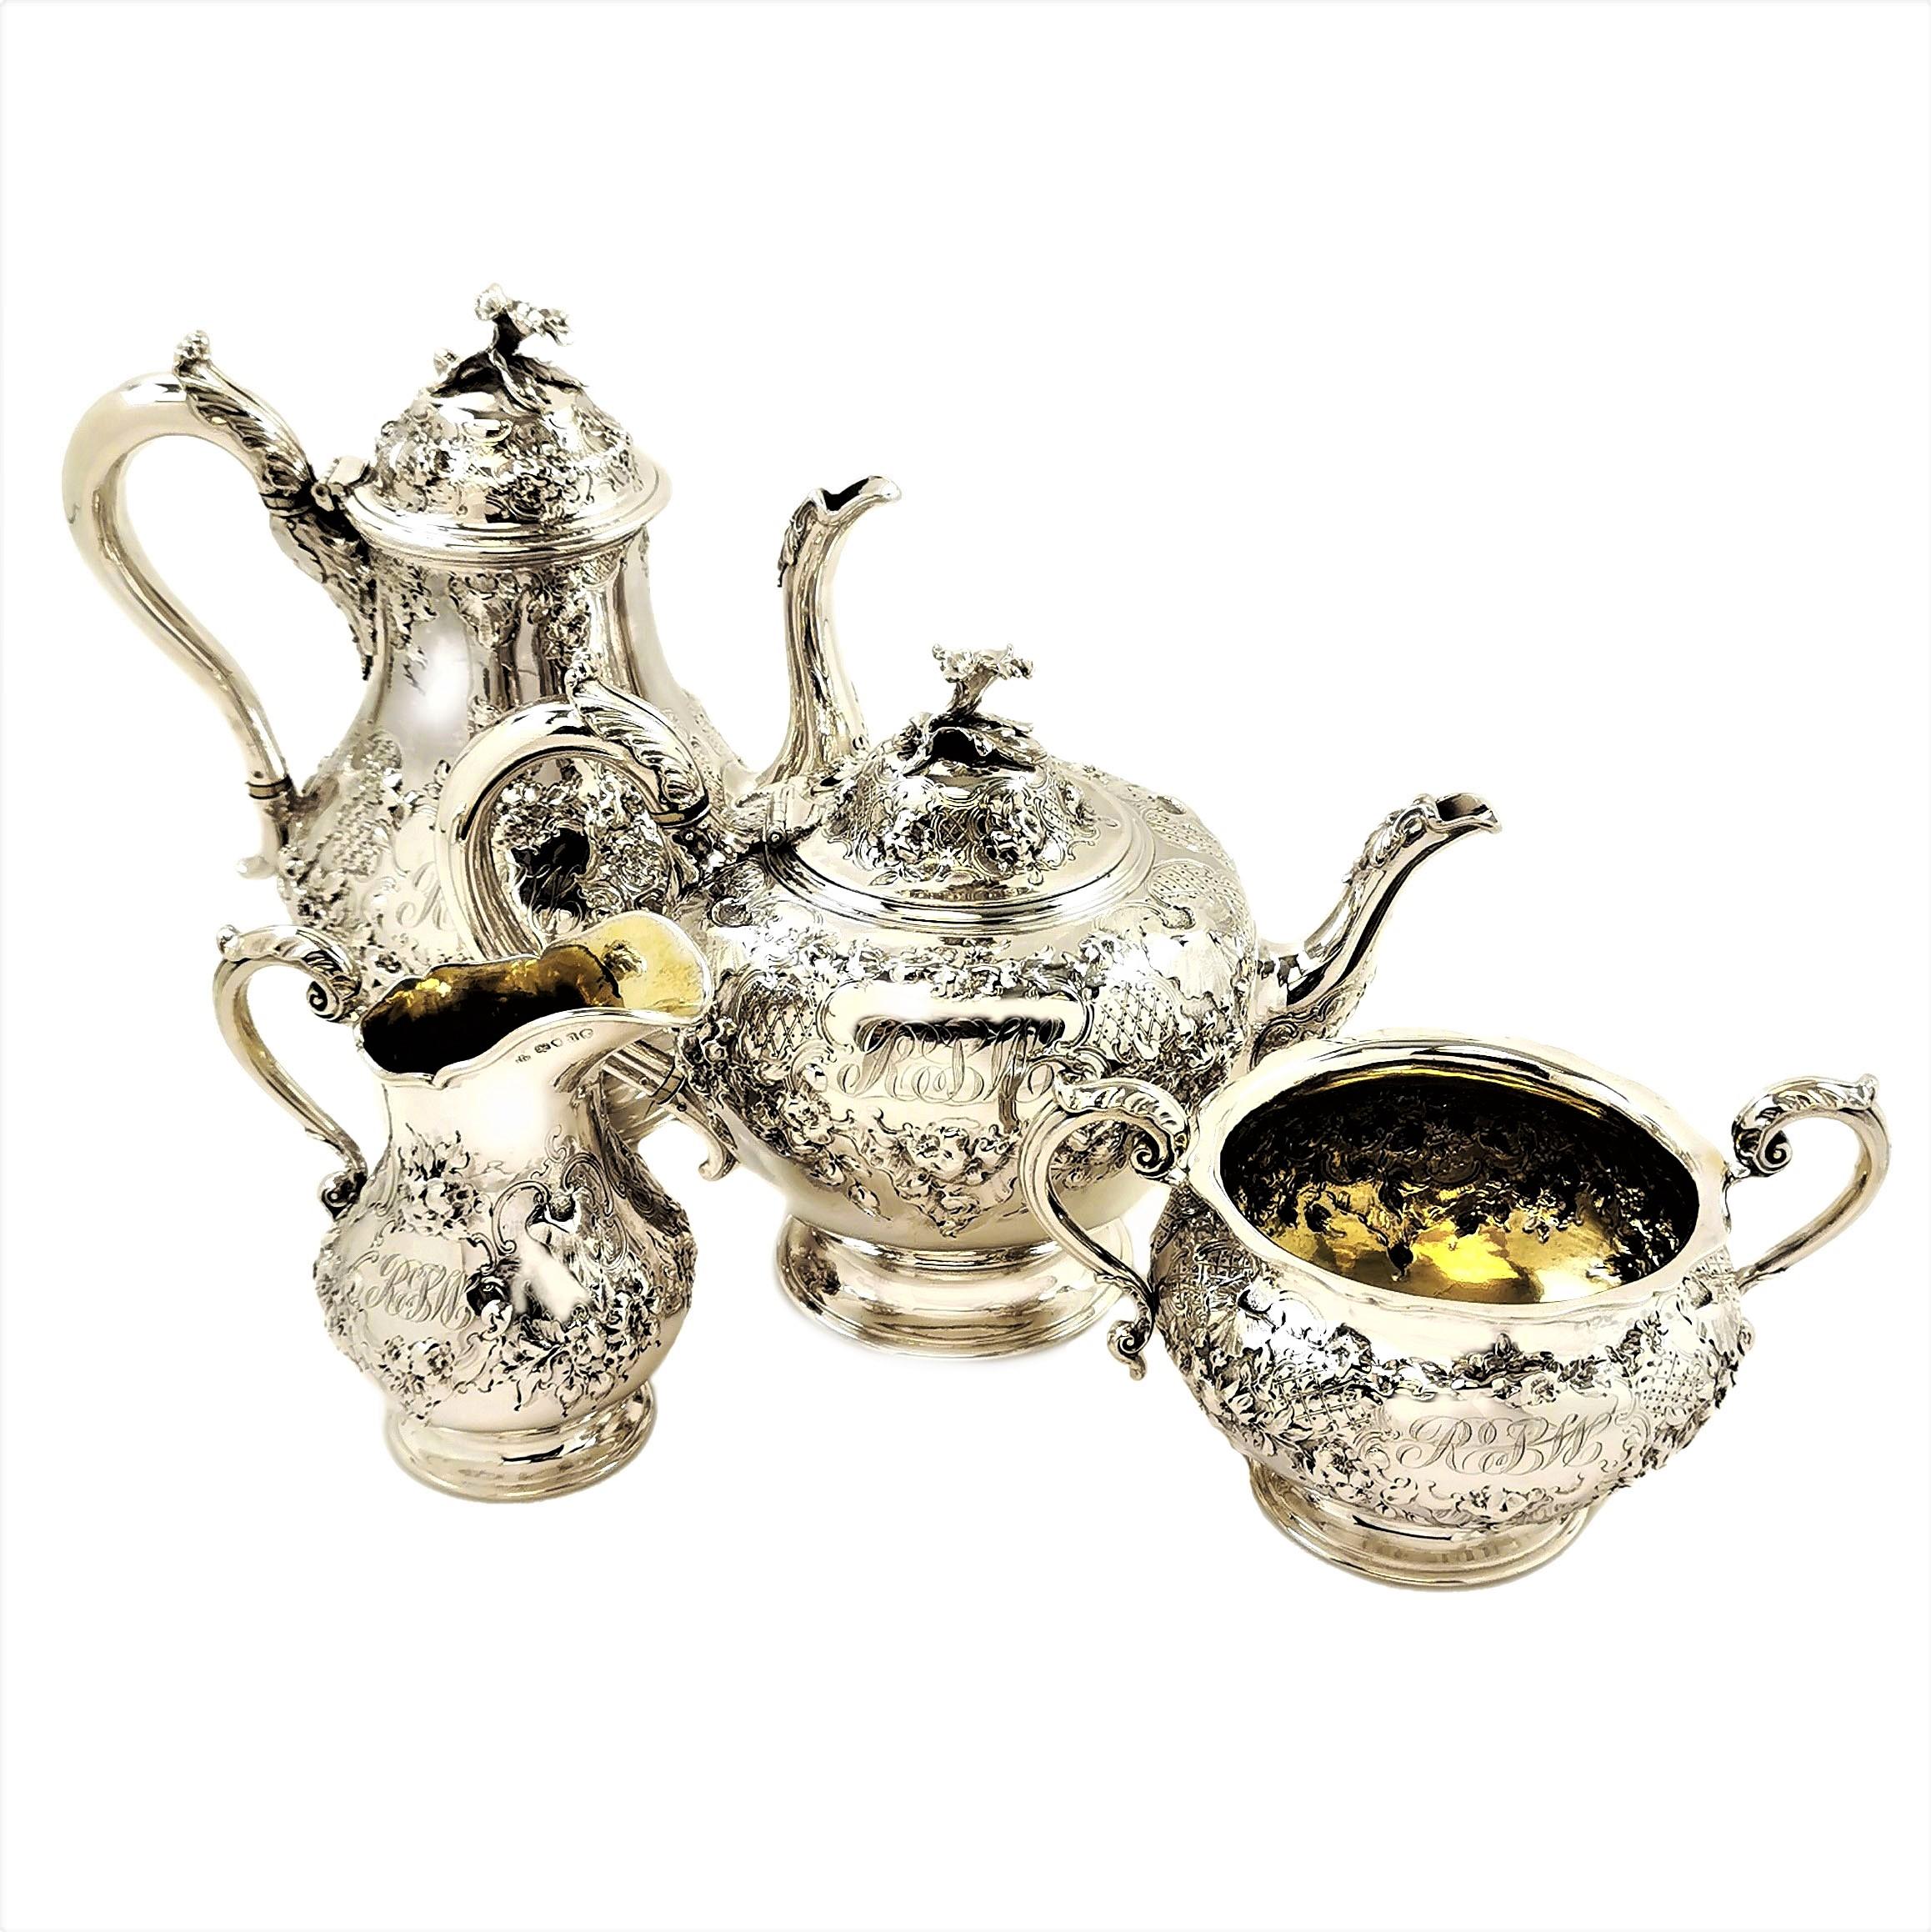 A beautiful Antique Victorian sterling Silver Tea and Coffee Set consisting of a Teapot, a Coffee Pot, a Cream / Milk Jug and a Sugar Bowl. The entire Set is decorated with a gorgeous ornate chased design showing a rich assortment of flowers. Each